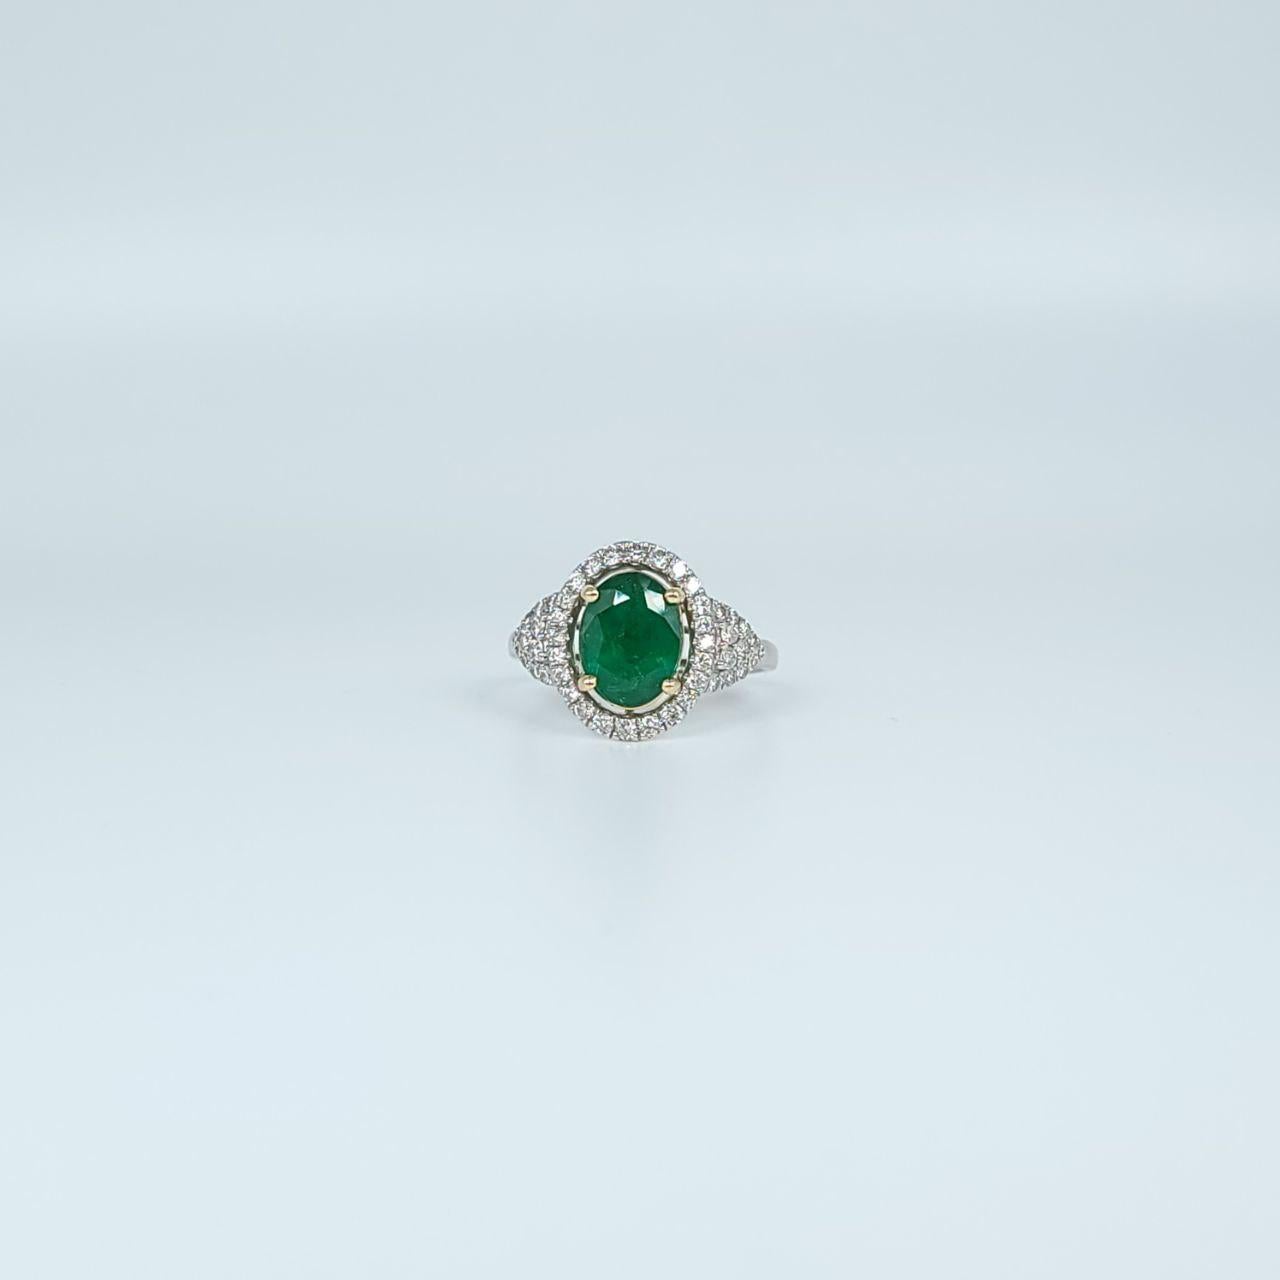 Round Cut Emerald Diamond Ring Cocktail Diamond Ring with Large Brazilian Emerald For Sale